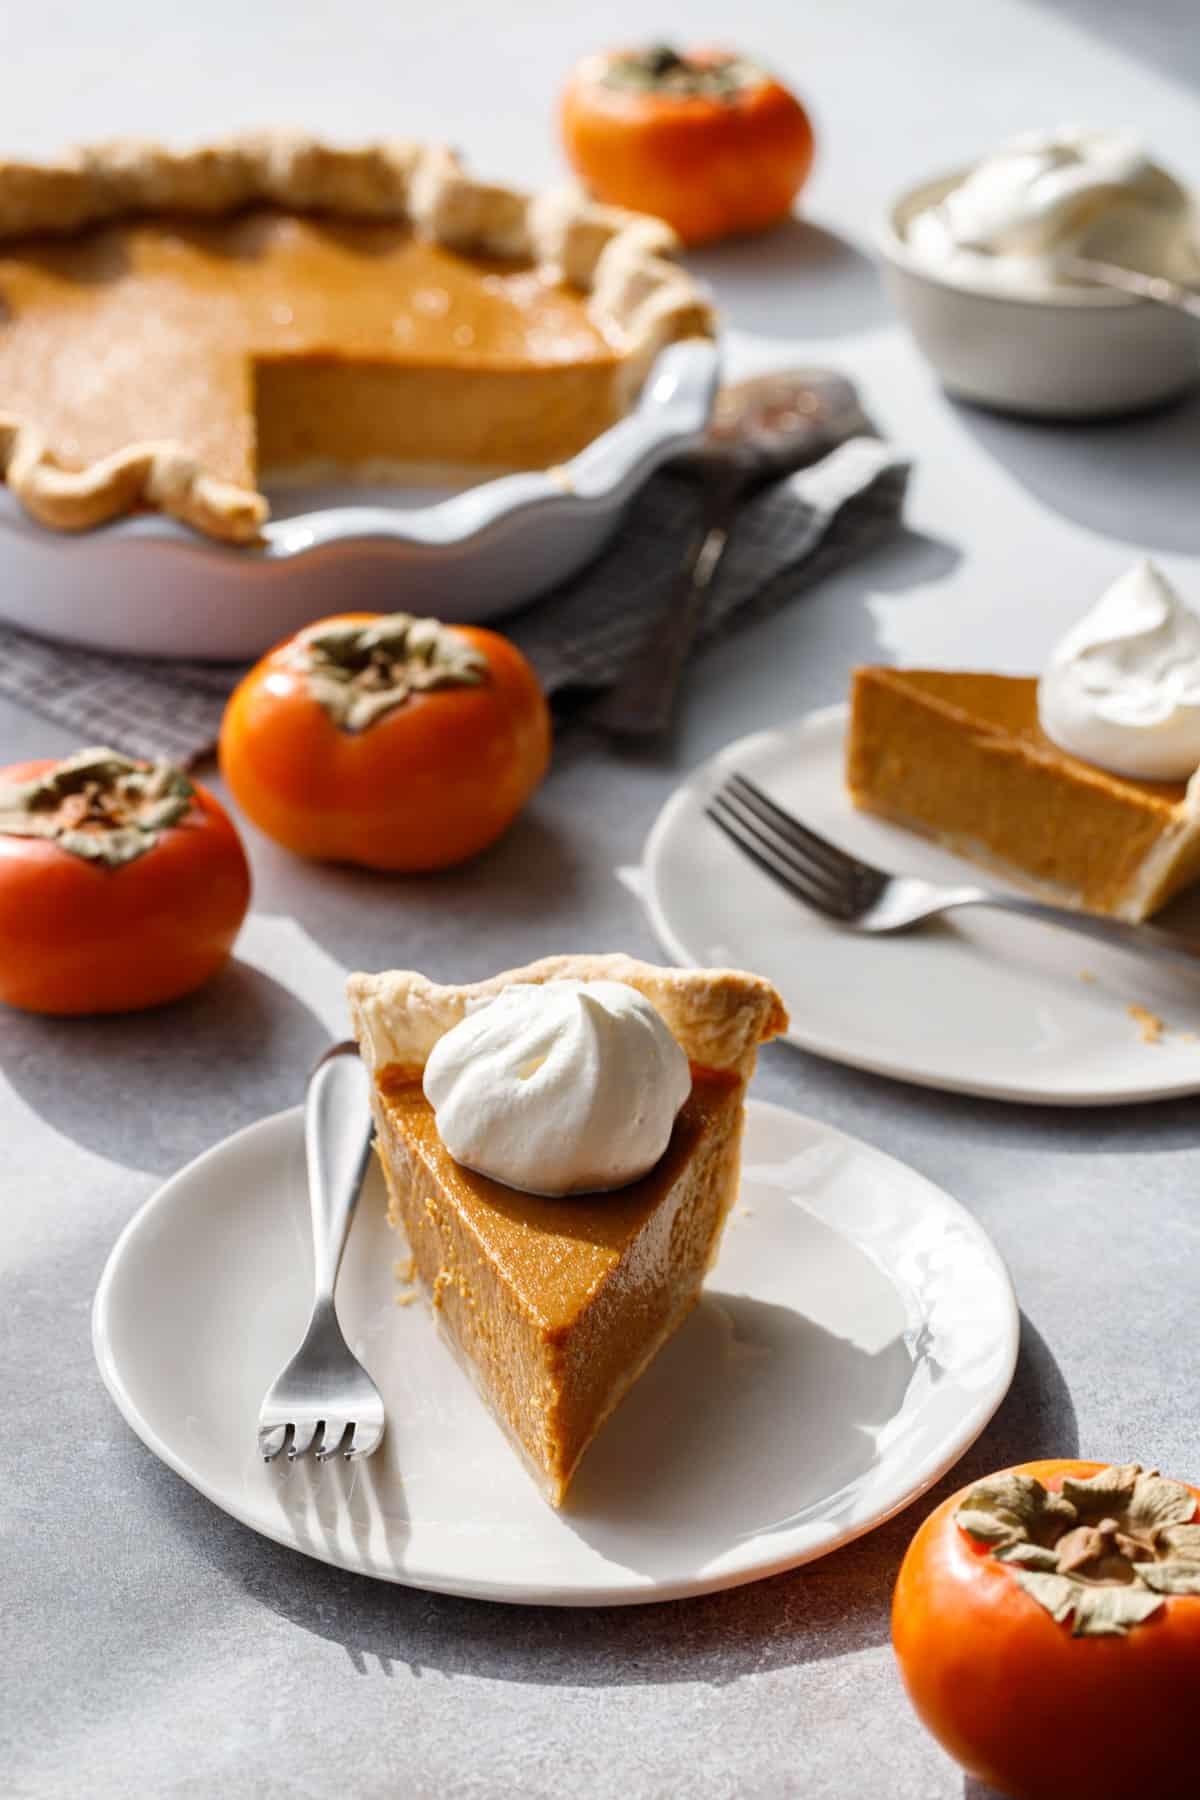 A slice of persimmon pie topped with whipped cream and surrounded by whole persimmons